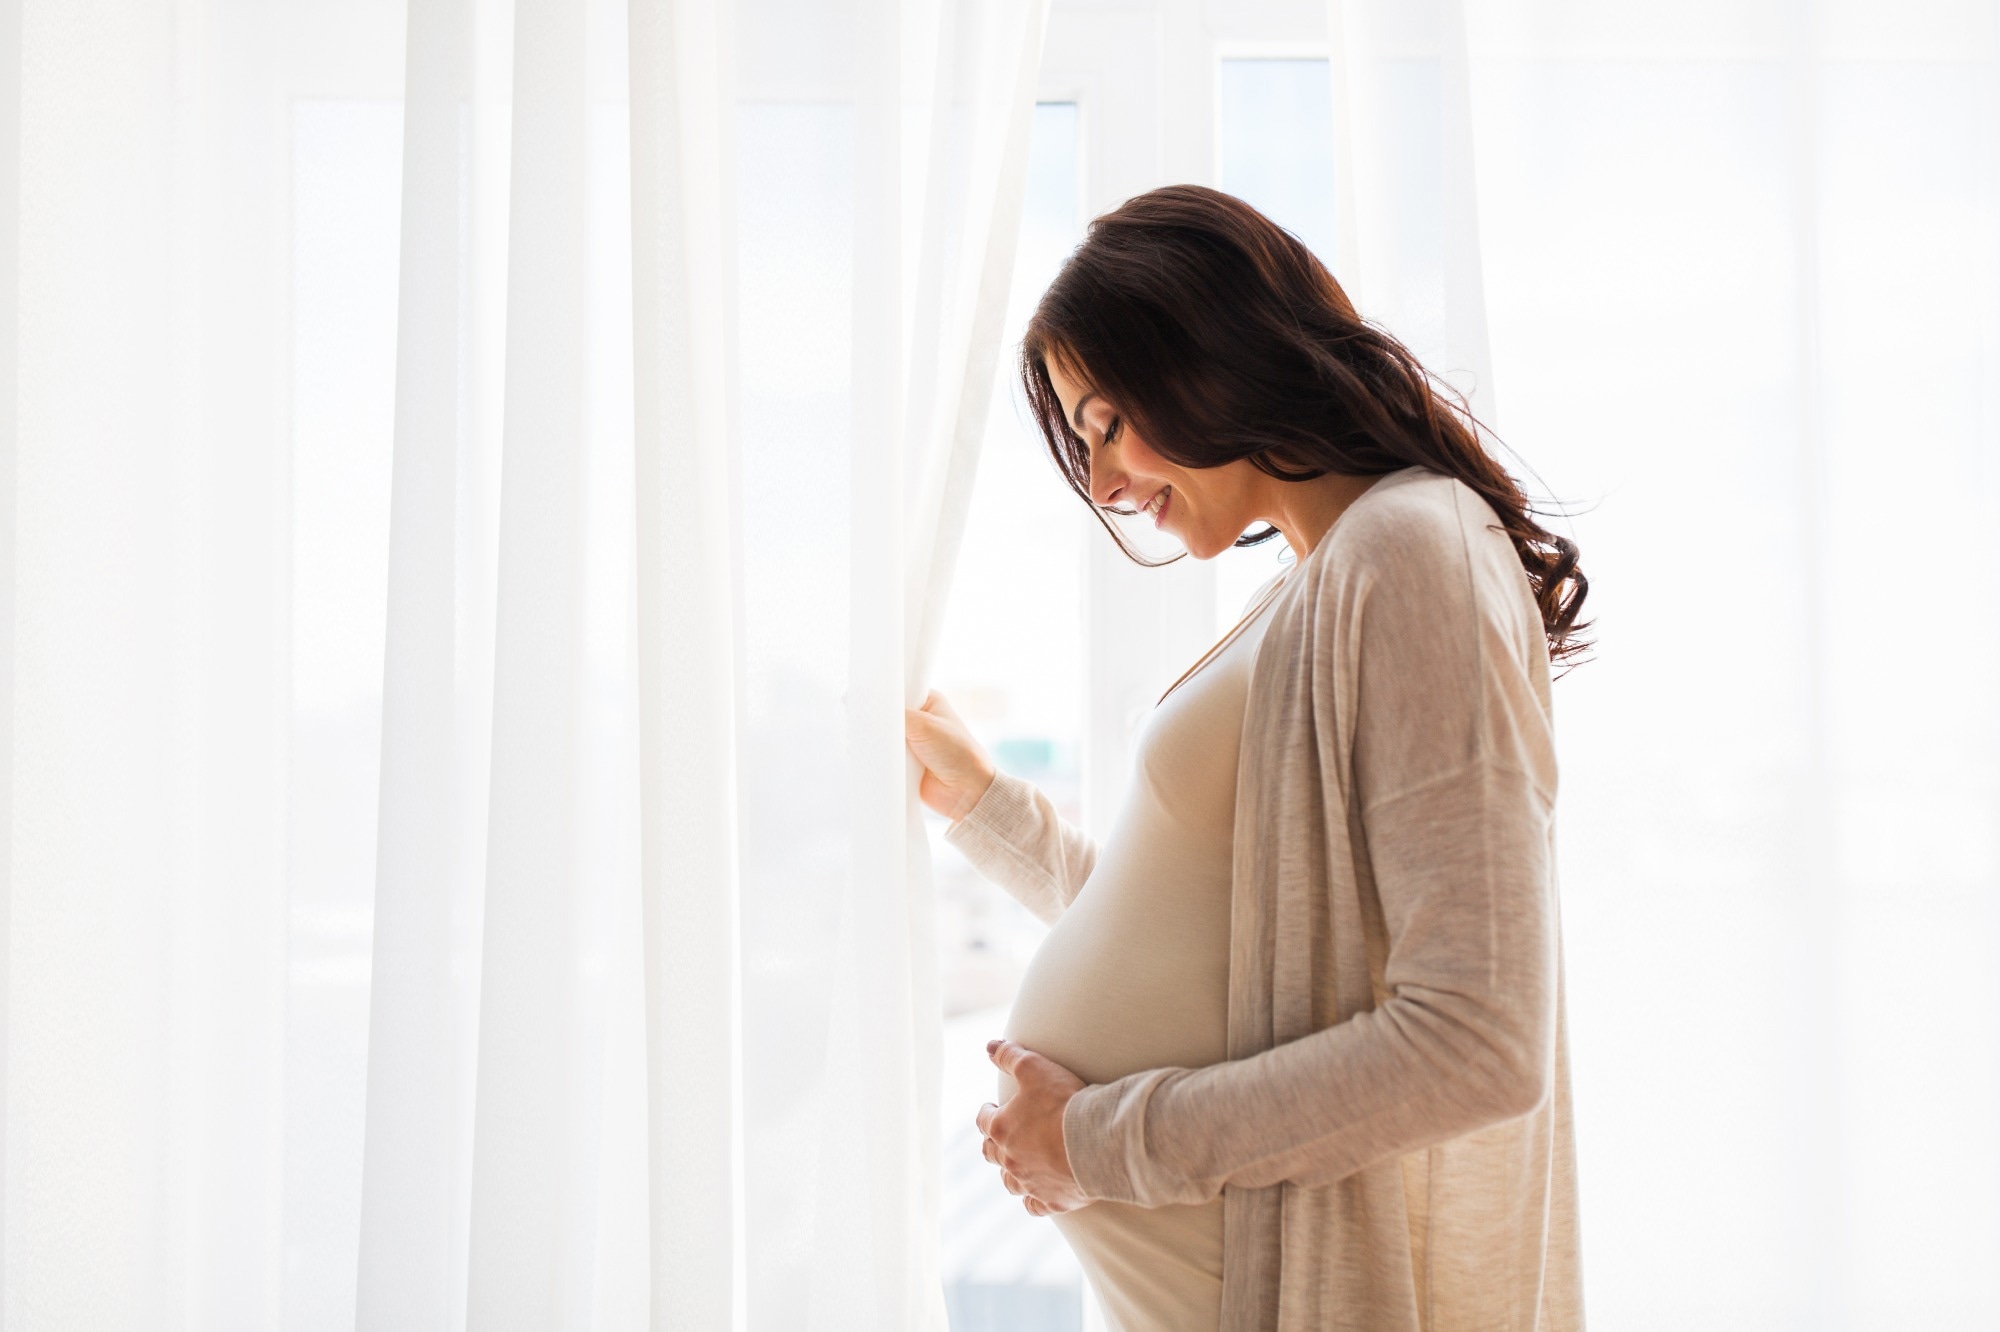 Study: Multi-omics analysis reveals the associations between altered gut microbiota, metabolites, and cytokines during pregnancy. Image Credit: Ground Picture/Shutterstock.com